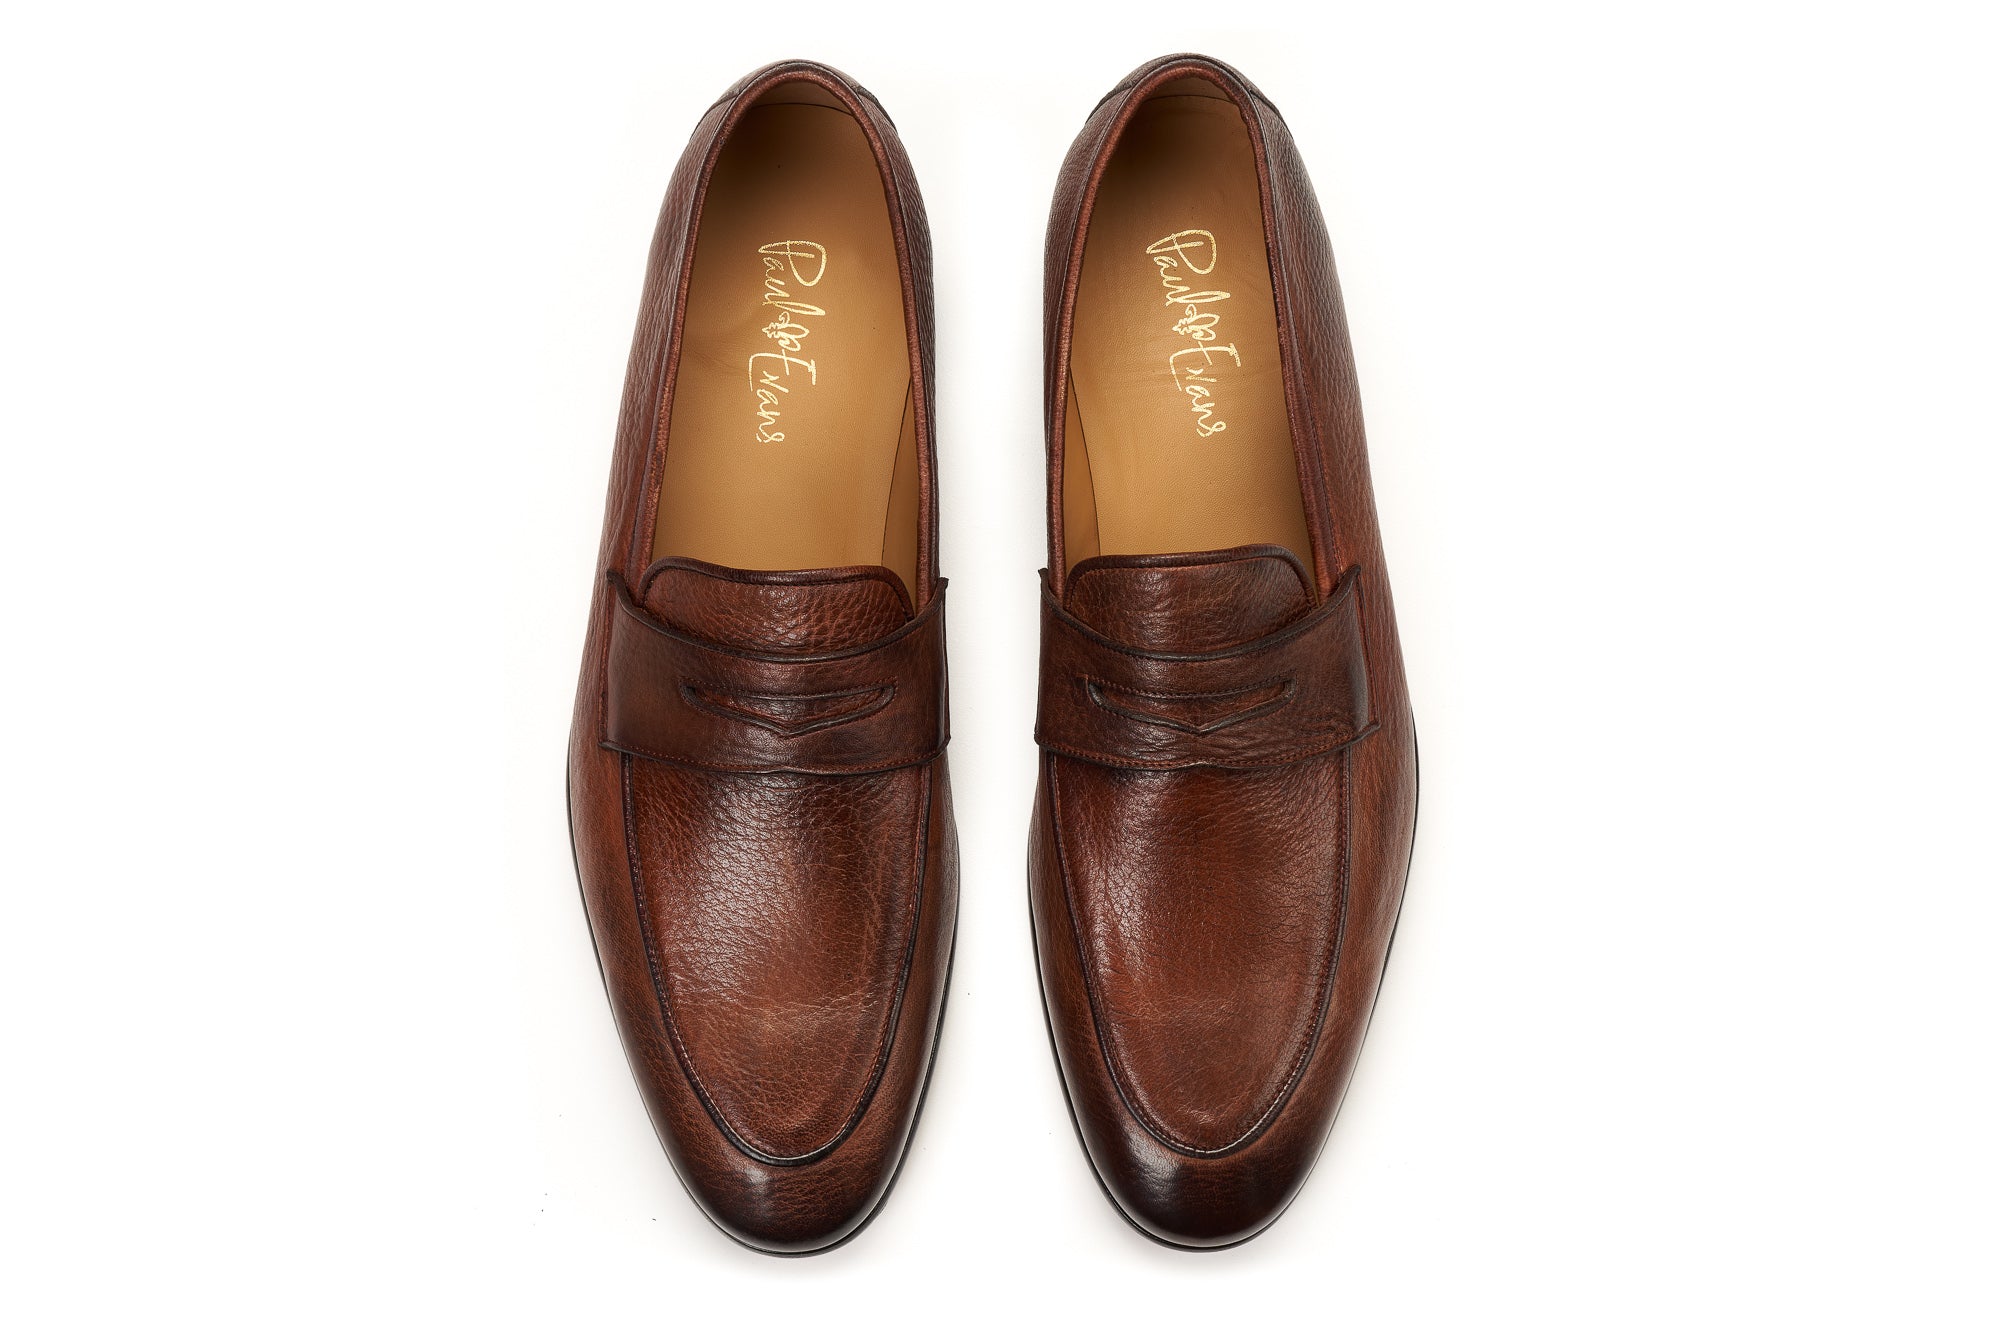 The Louis Penny Loafer - Brown